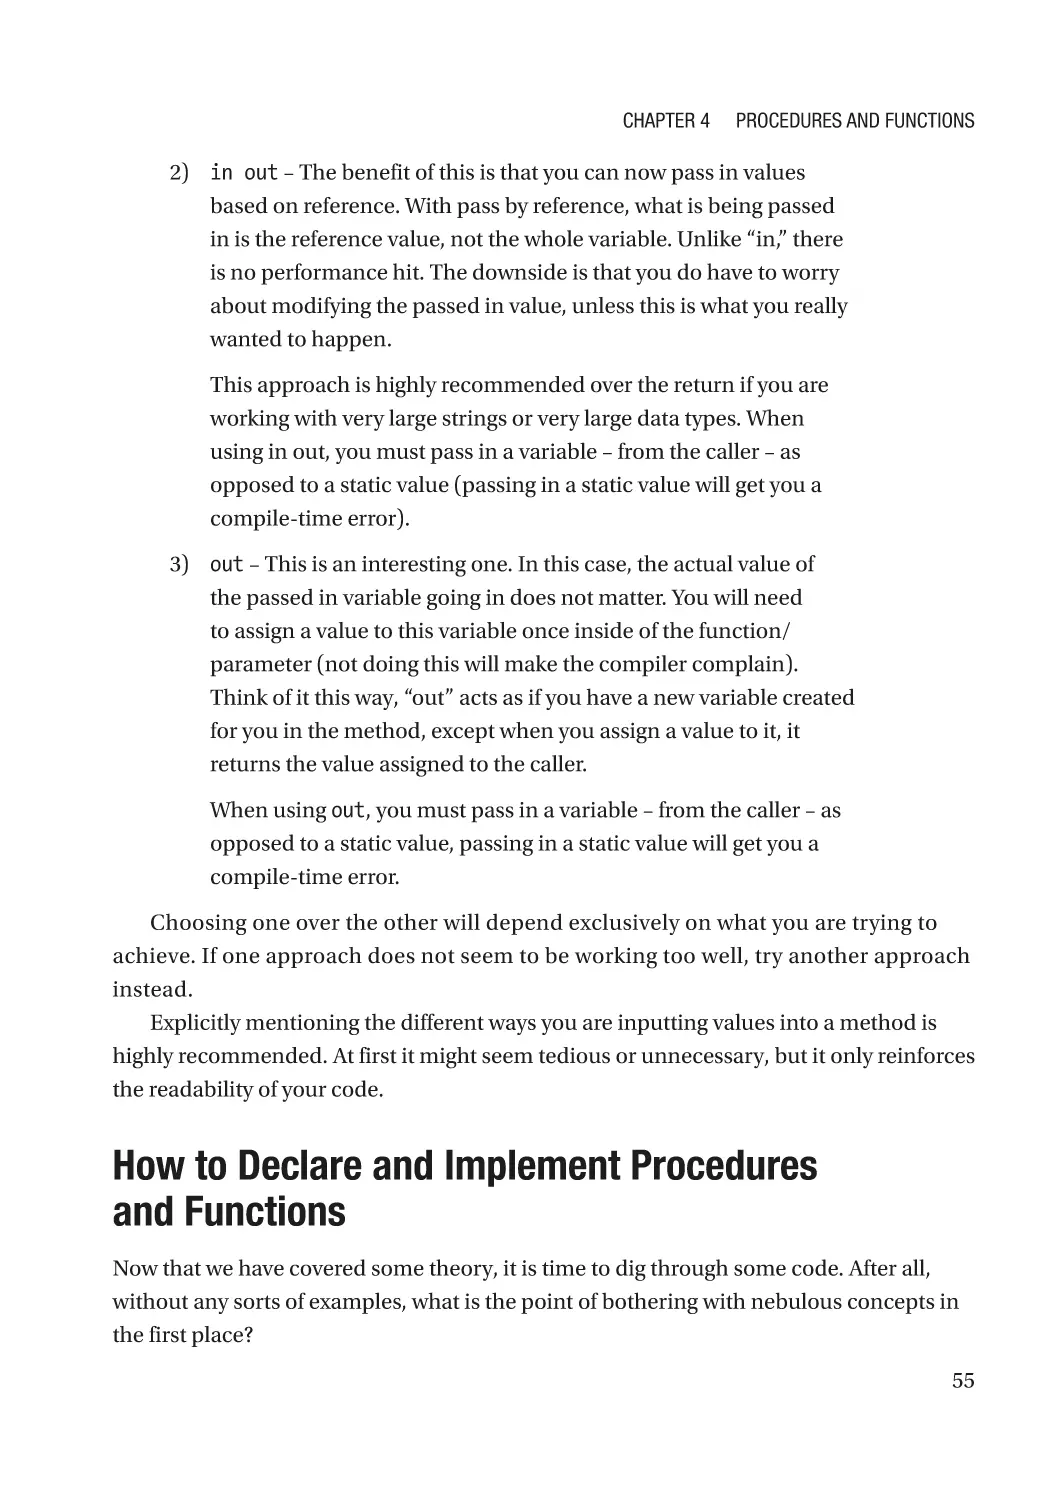 How to Declare and Implement Procedures and Functions